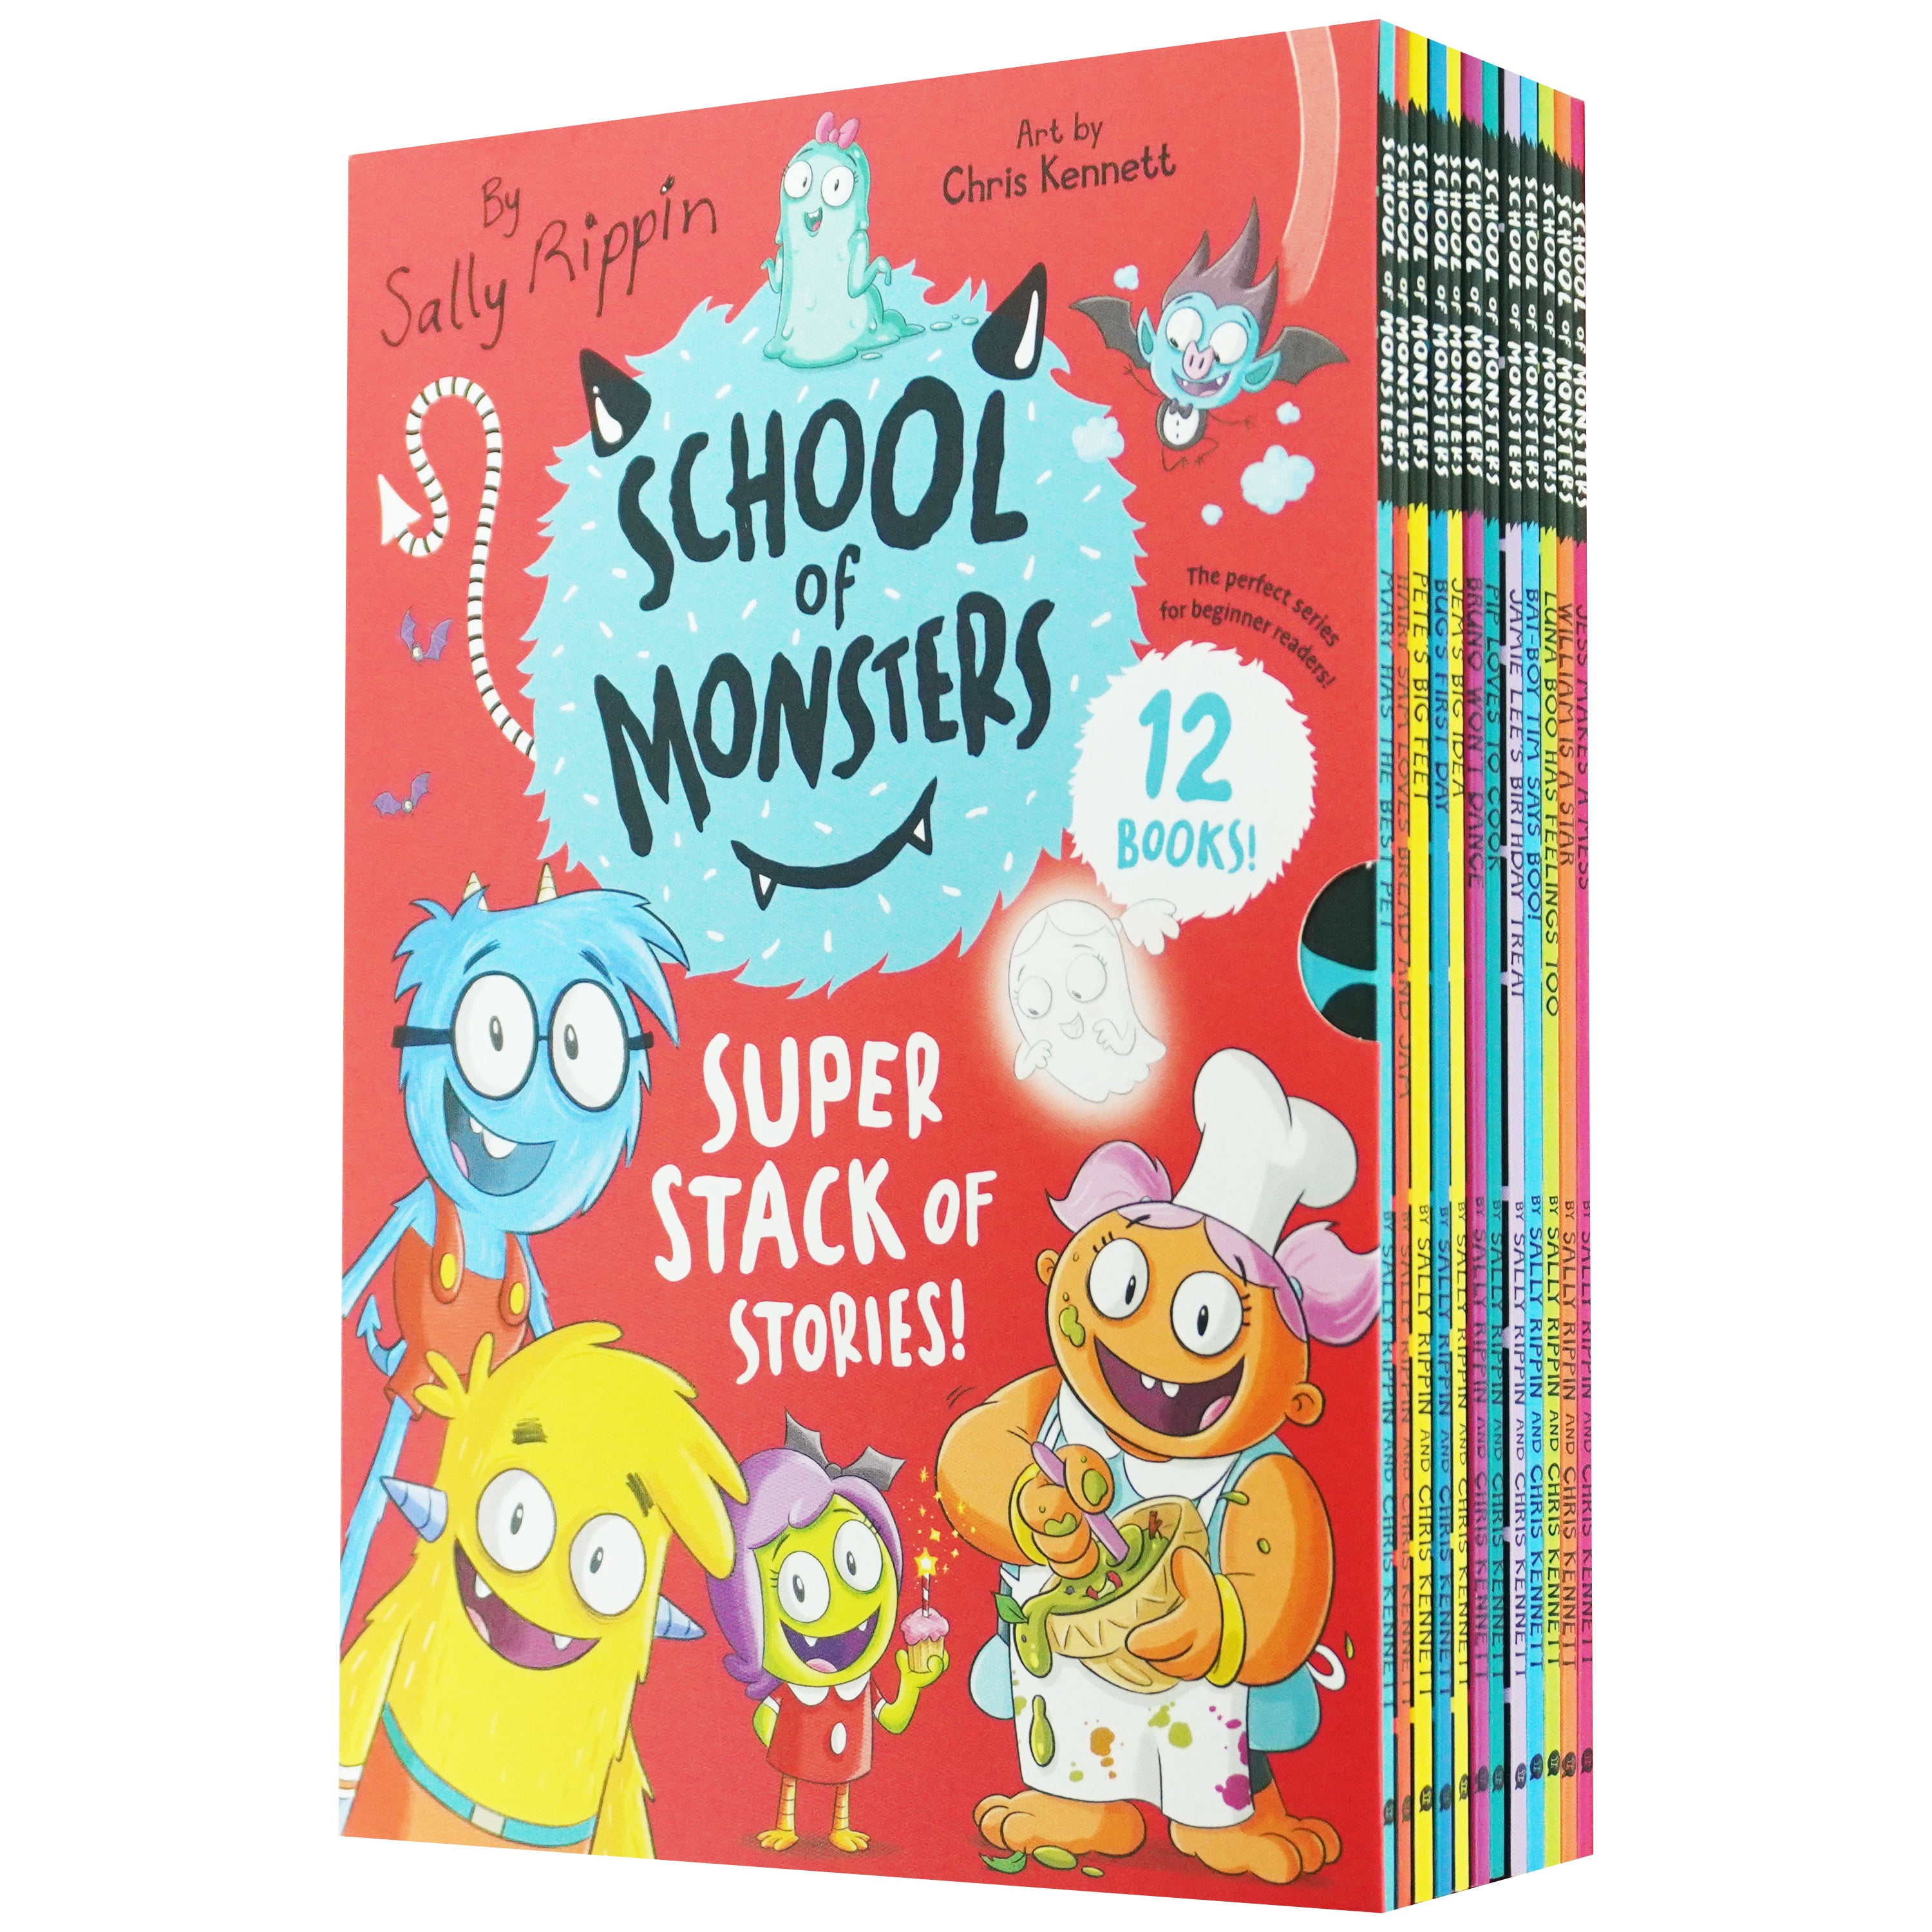 School of Monsters series by Sally Rippin 12 Books Collection Box Set - Ages 4+ - Paperback